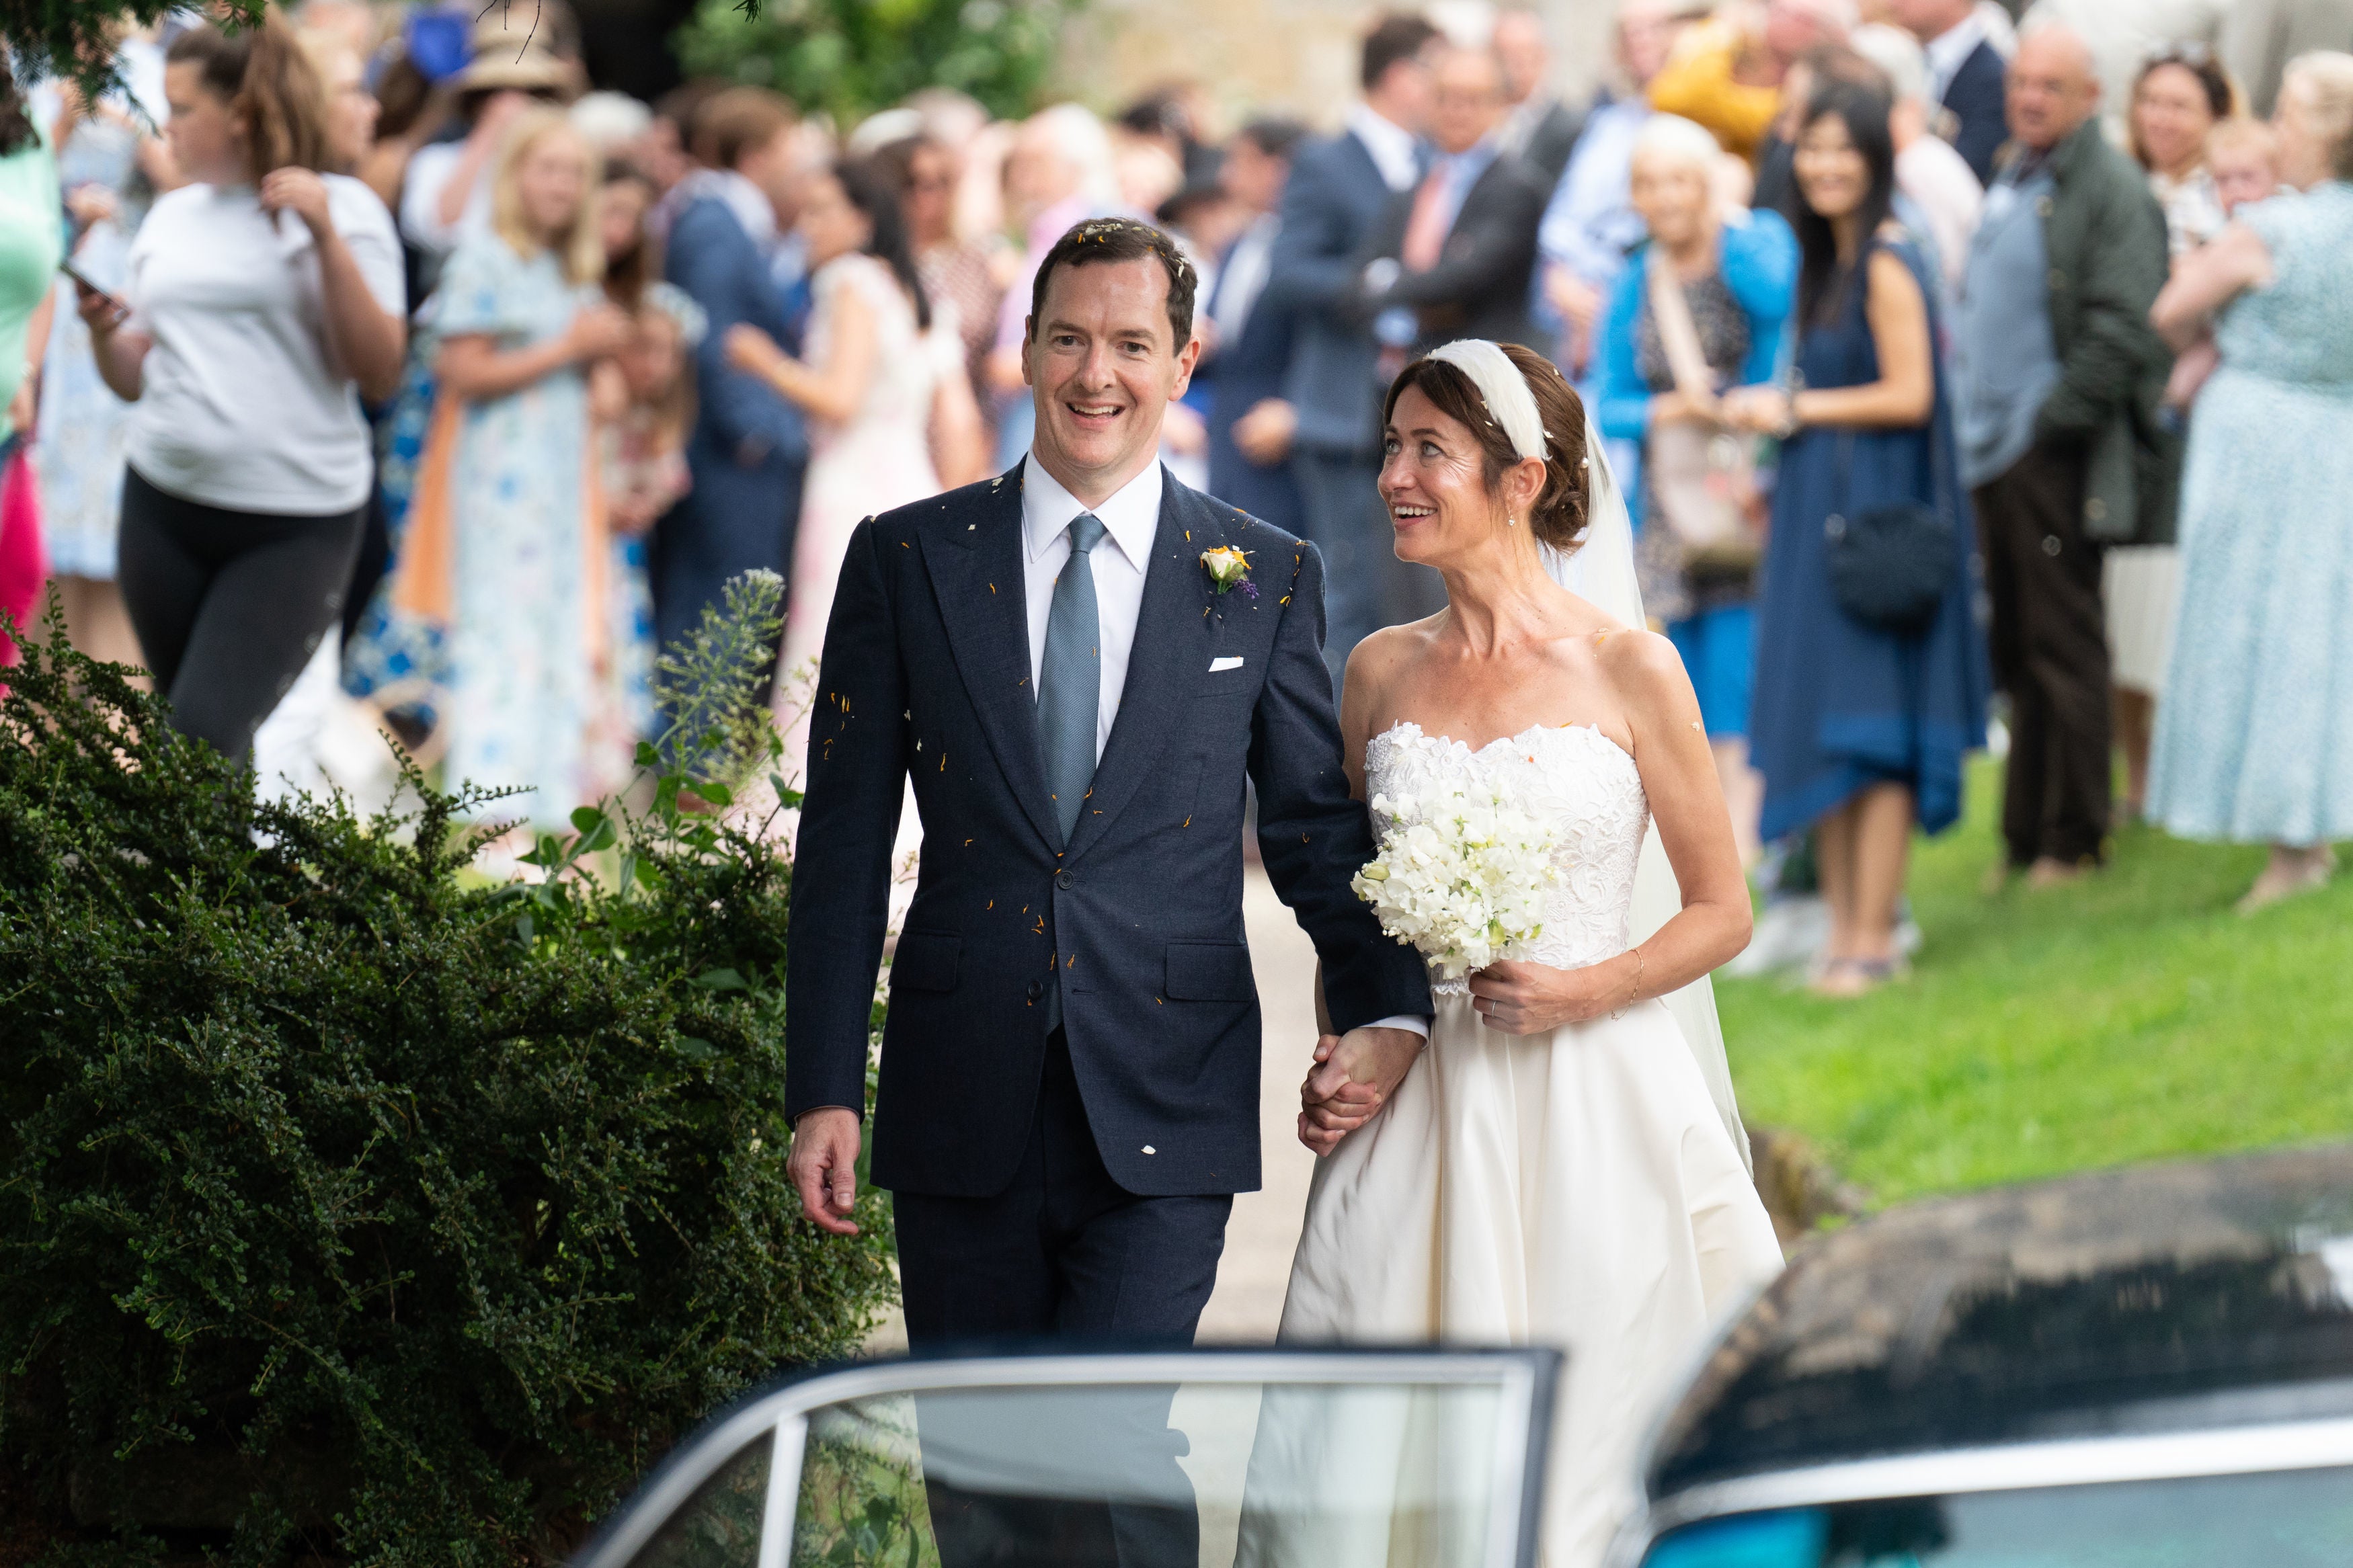 Osborne and Rogers wed in a star-studded ceremony last year